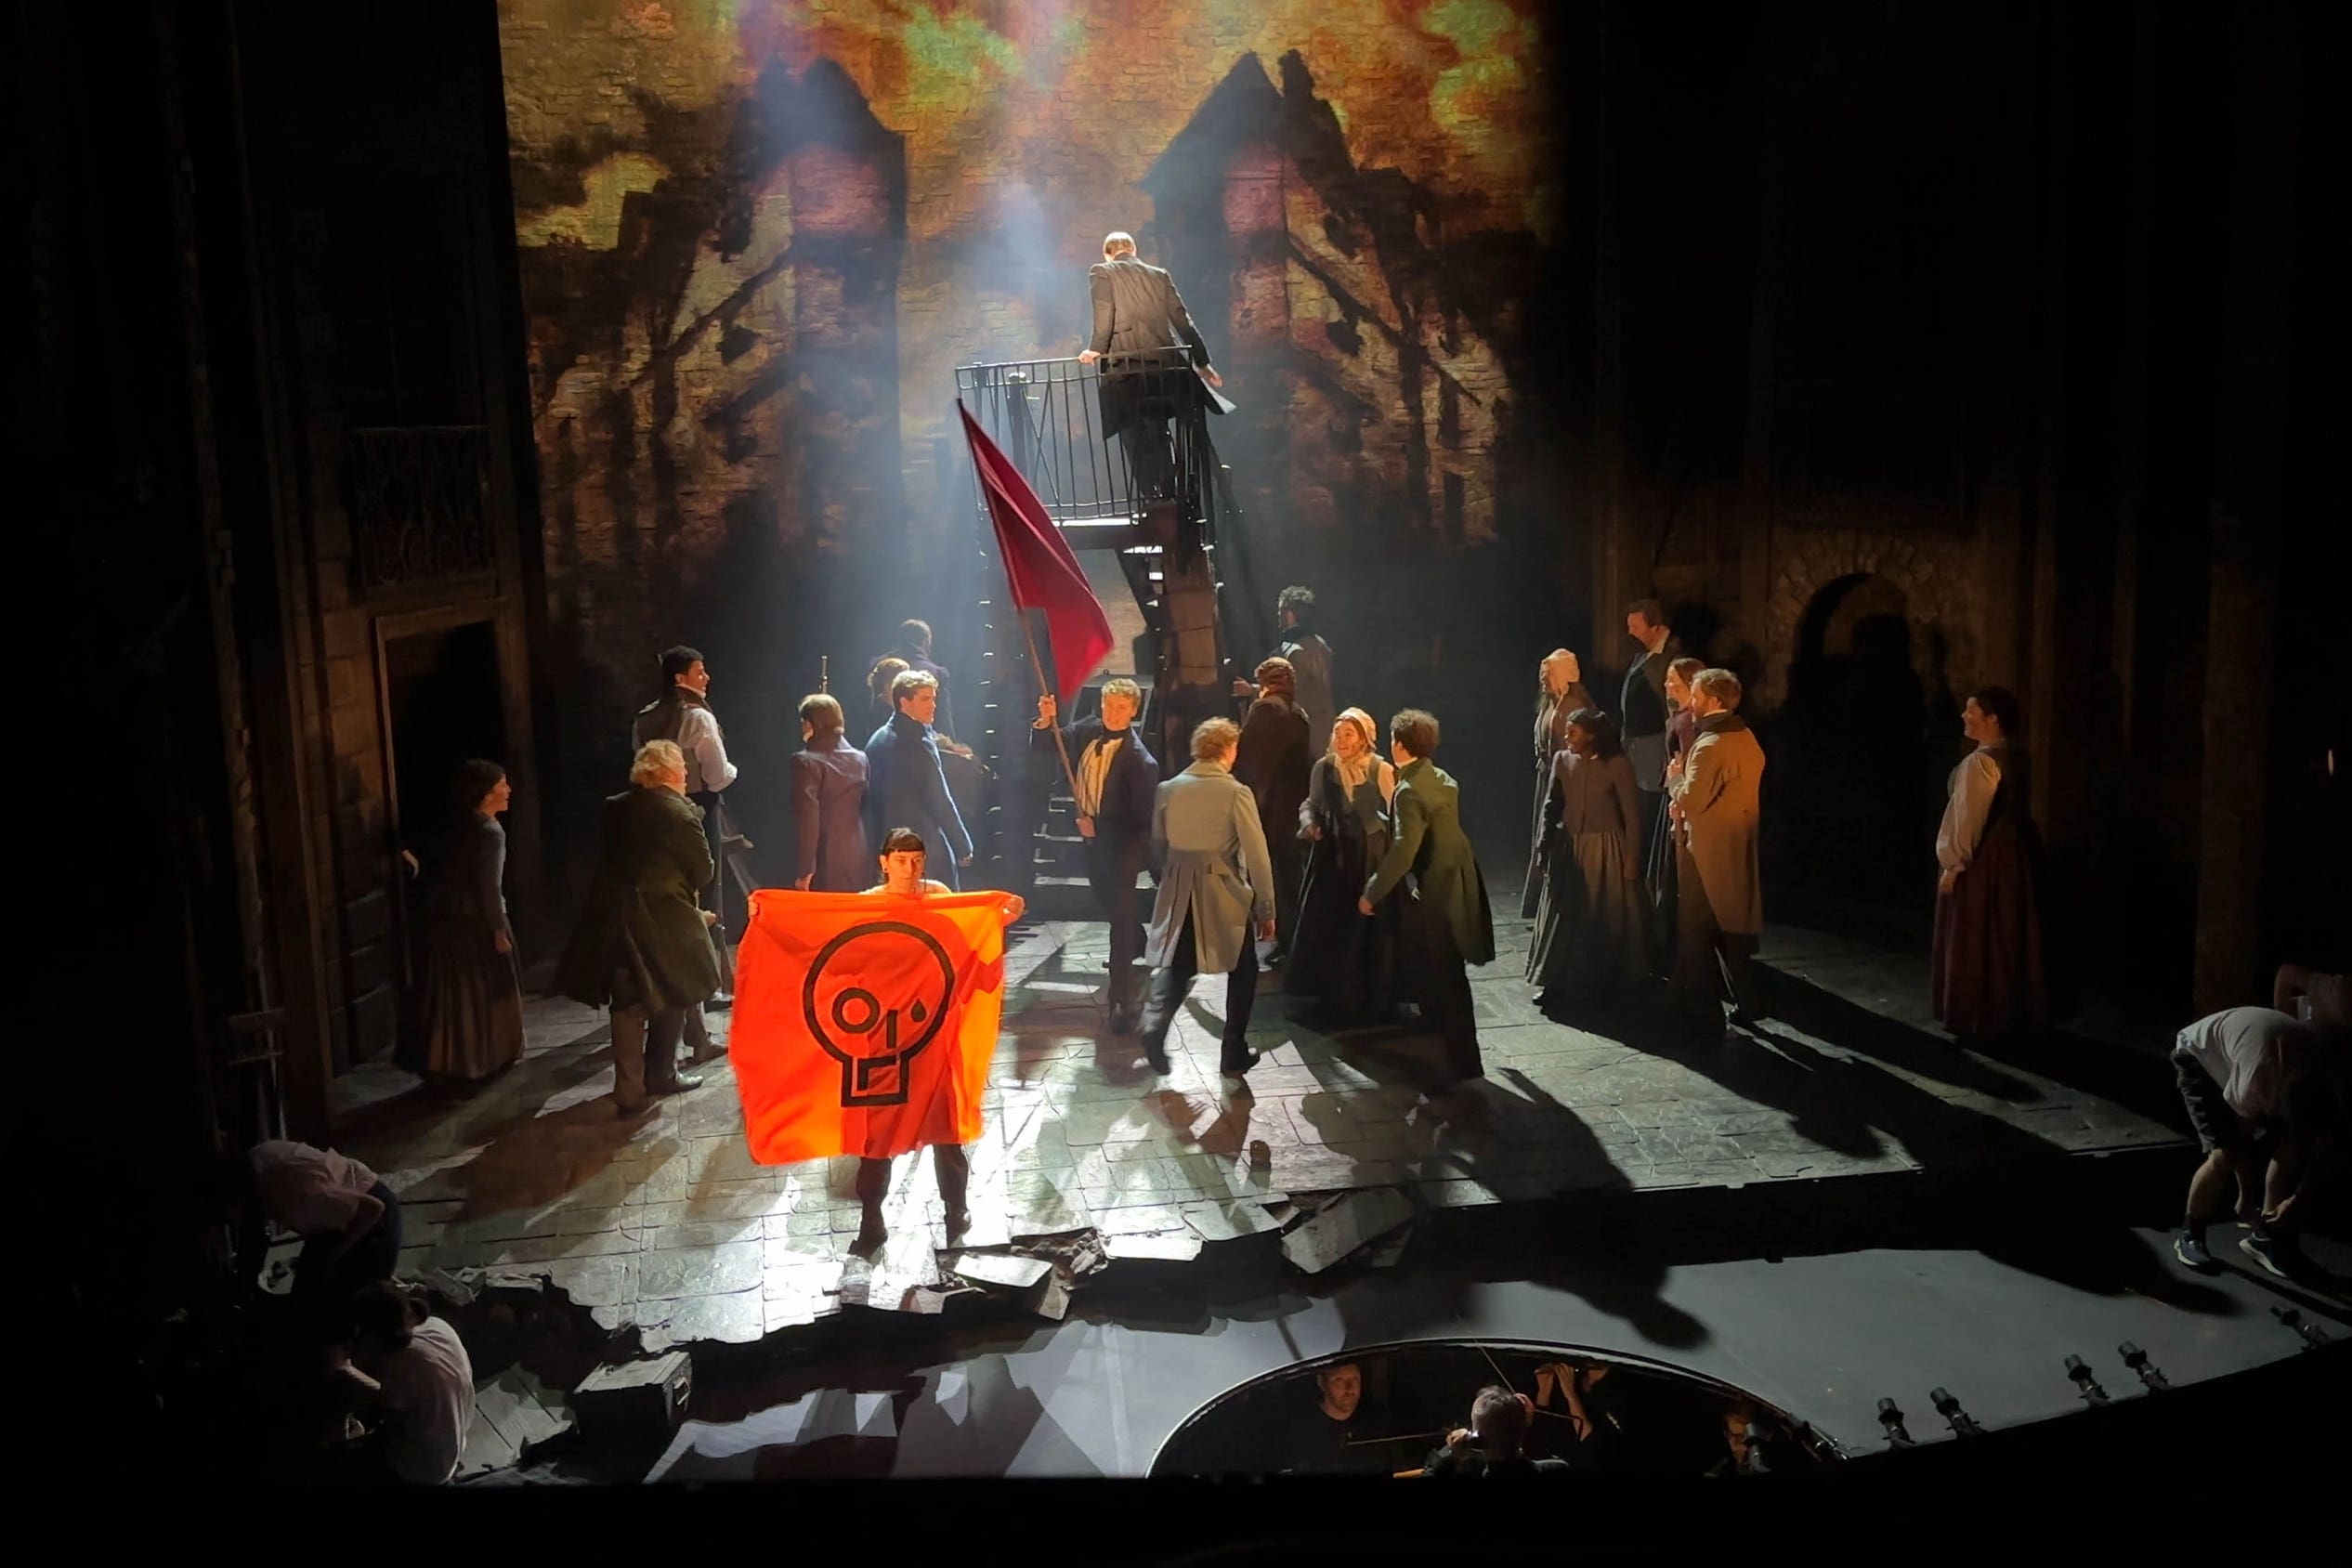 A performance of Les Miserables at the Sondheim Theatre was stopped when activists stormed the stage on October 5